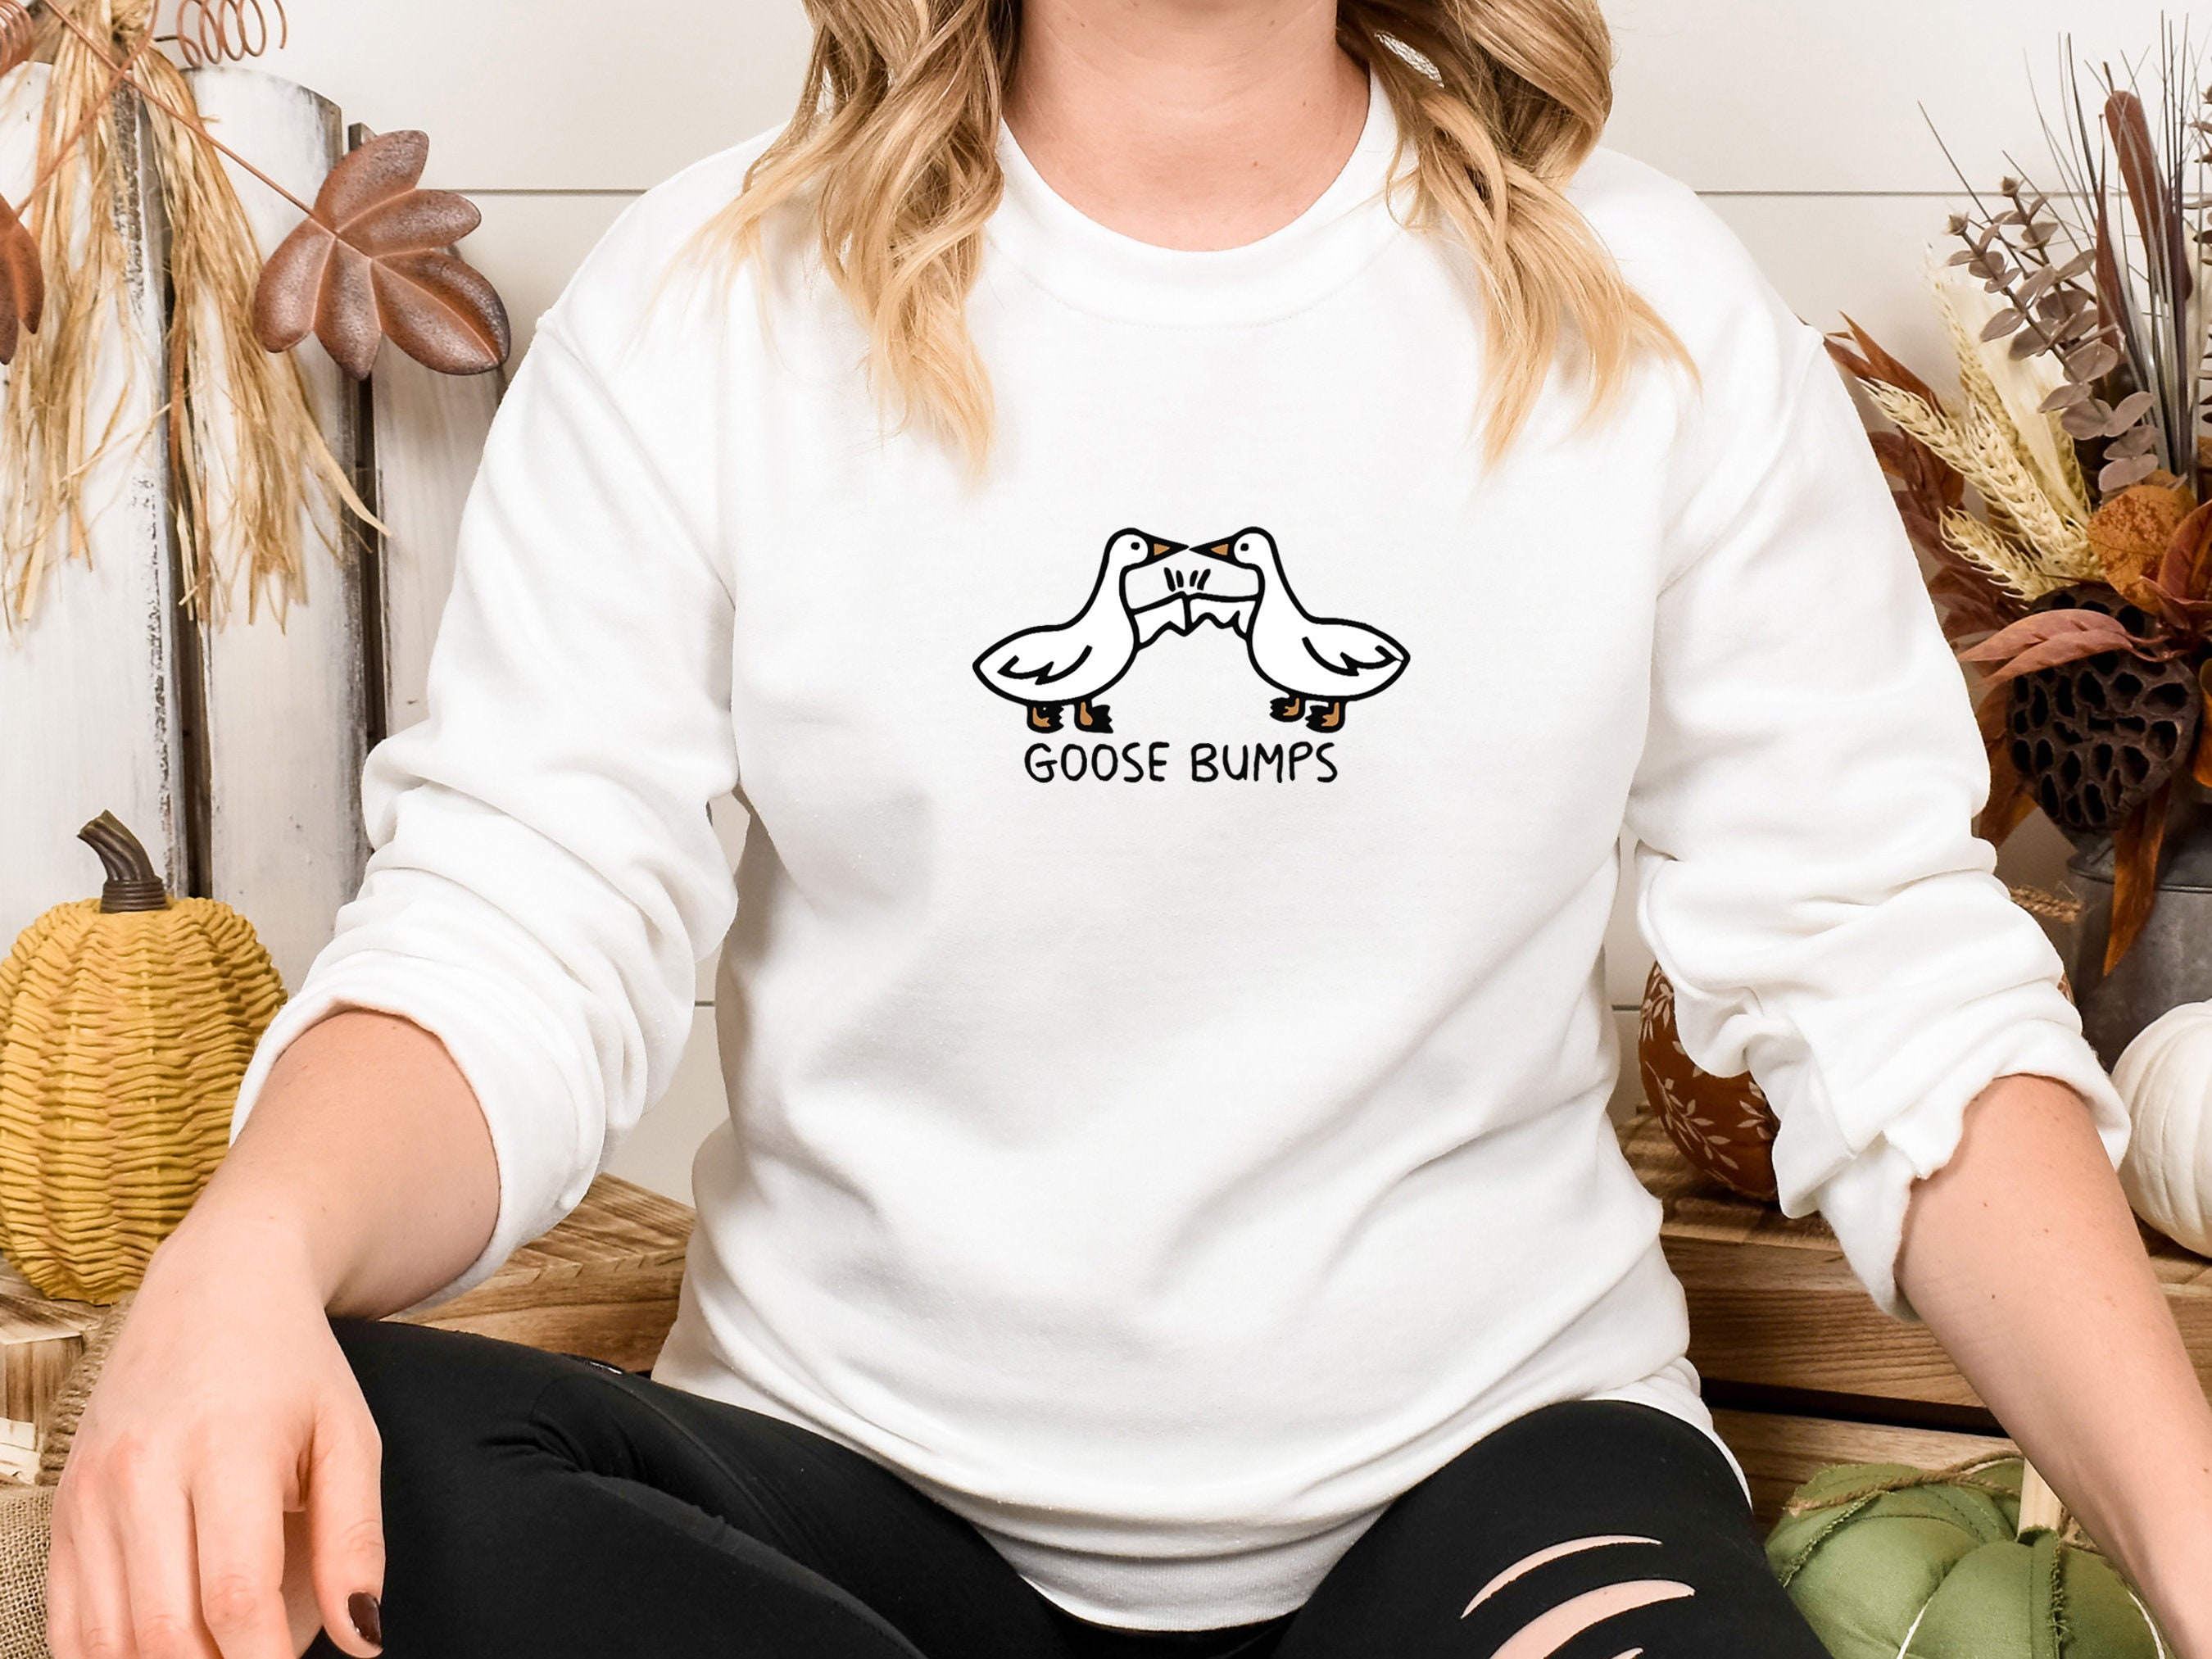 Discover Goose Bumps Sweatshirt, Silly Goose Sweatshirt, Funny Goose Sweatshirt, High Five Sweatshirt, Best Friends Sweatshirt, Fist Bump Sweatshirt